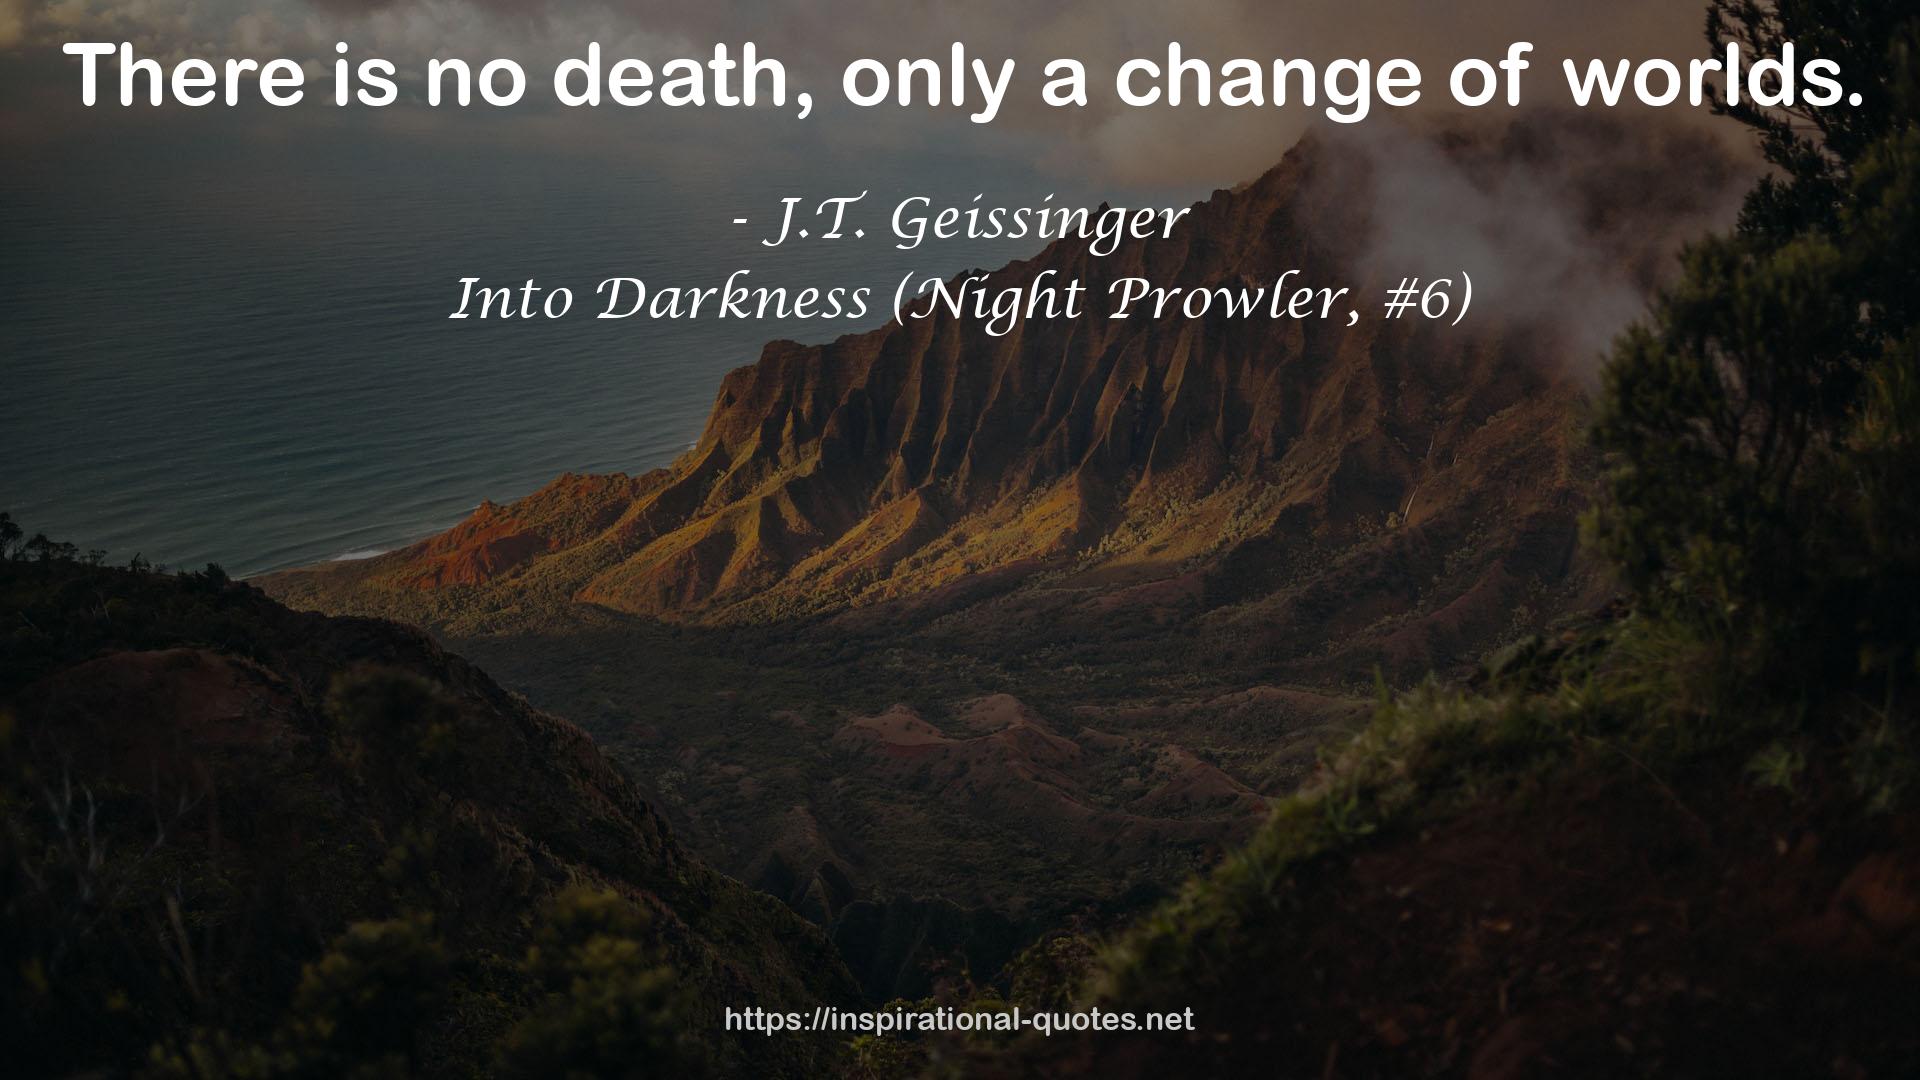 Into Darkness (Night Prowler, #6) QUOTES